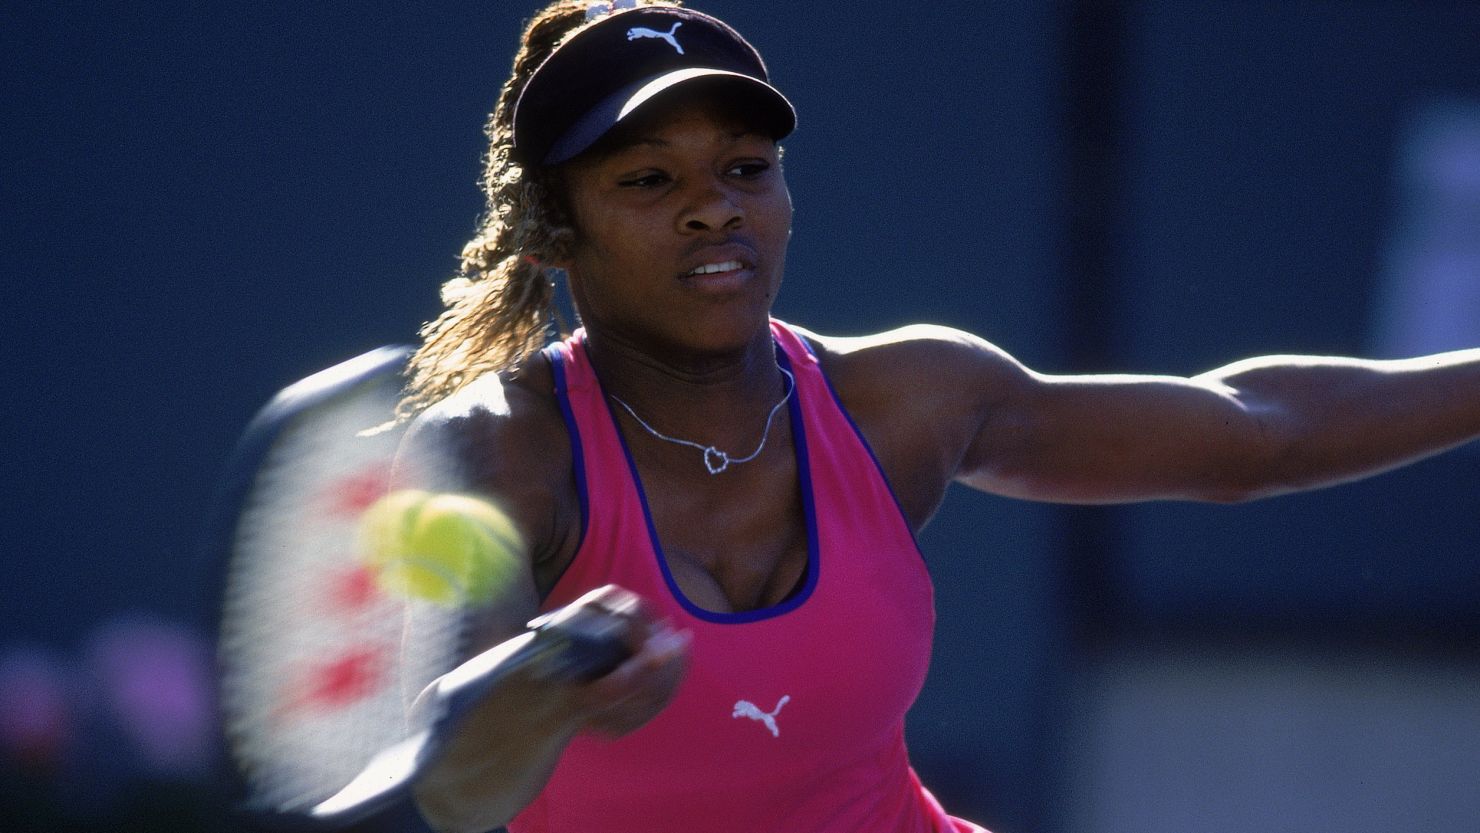 Her 2001 appearance at Indian Wells was a difficult and painful moment in Serena Williams' career.